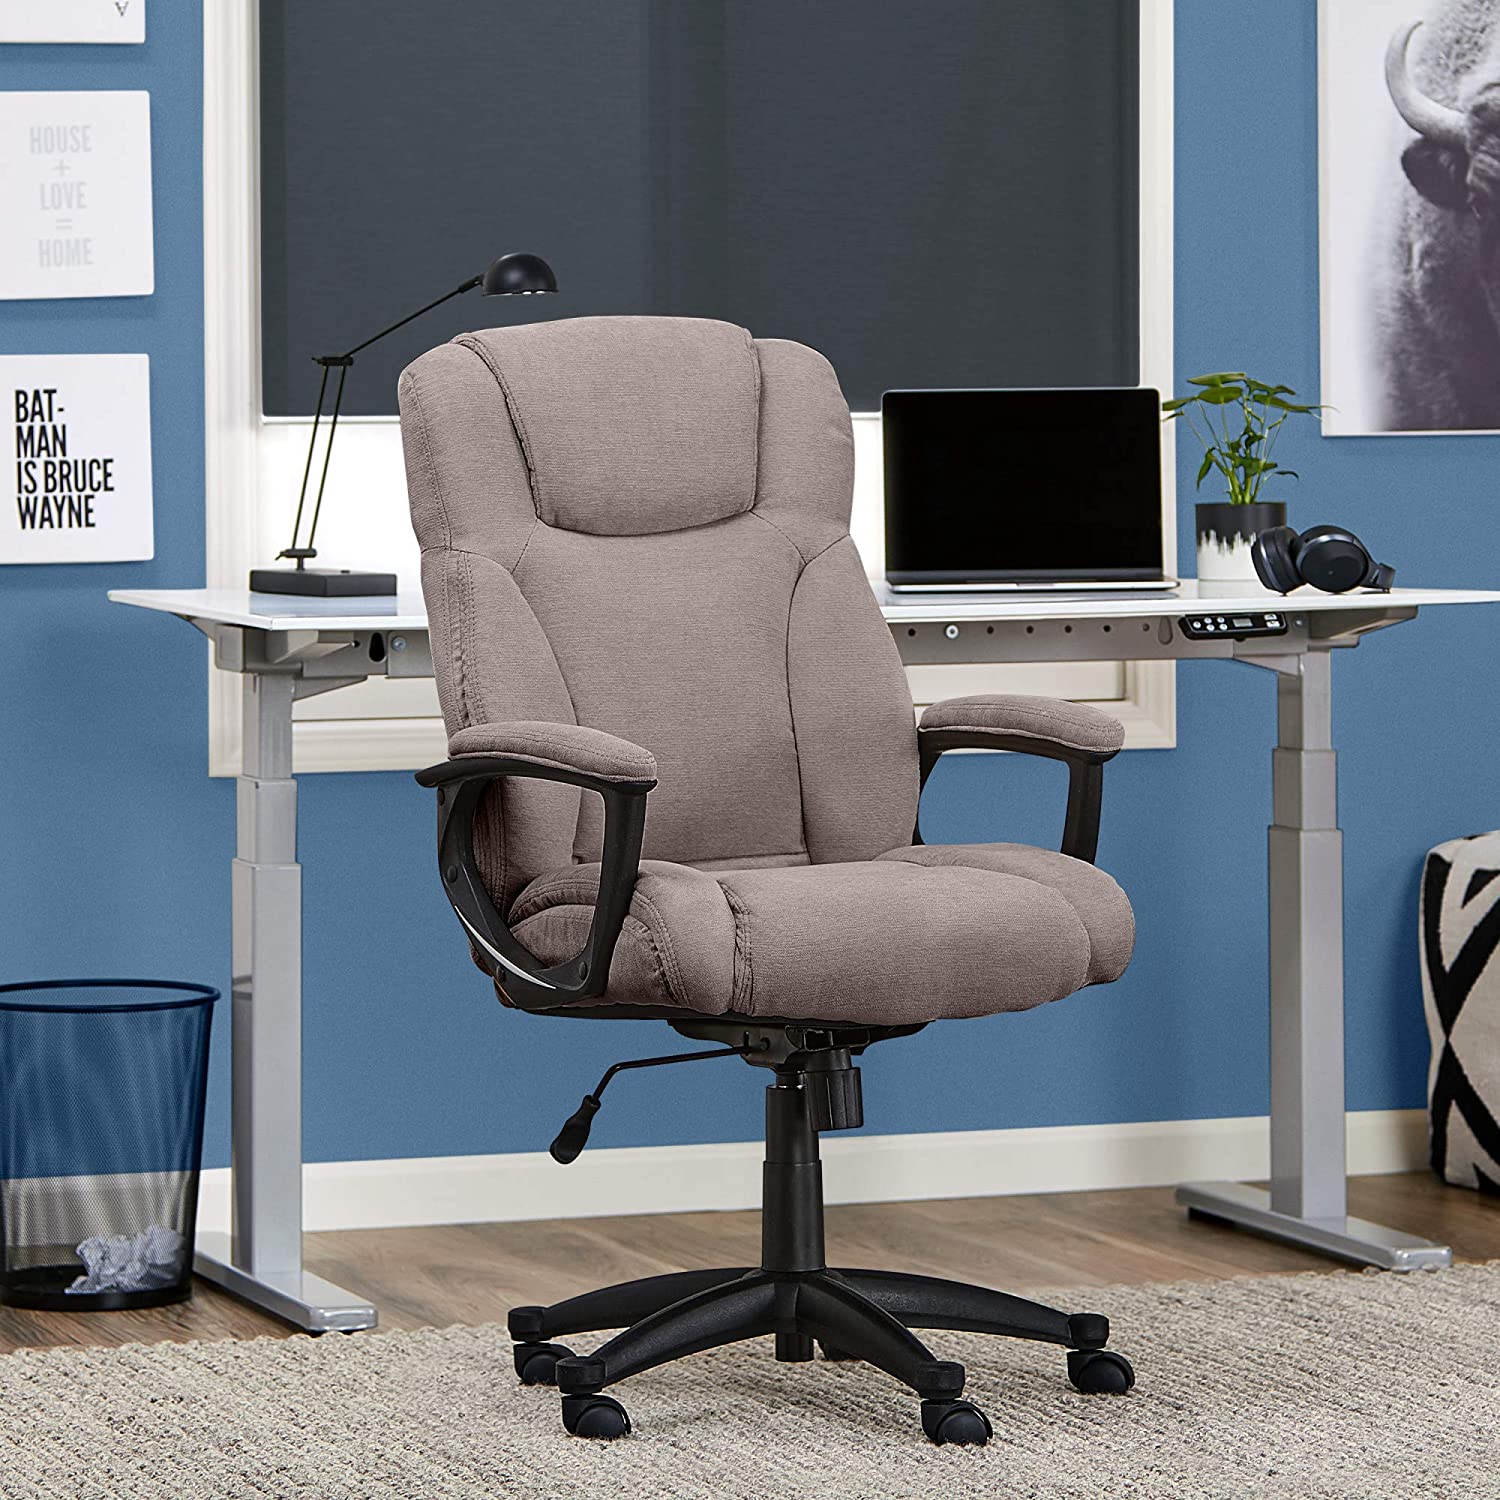 Serta Executive High Back Office Chair with Lumbar Support, Gray - Cute